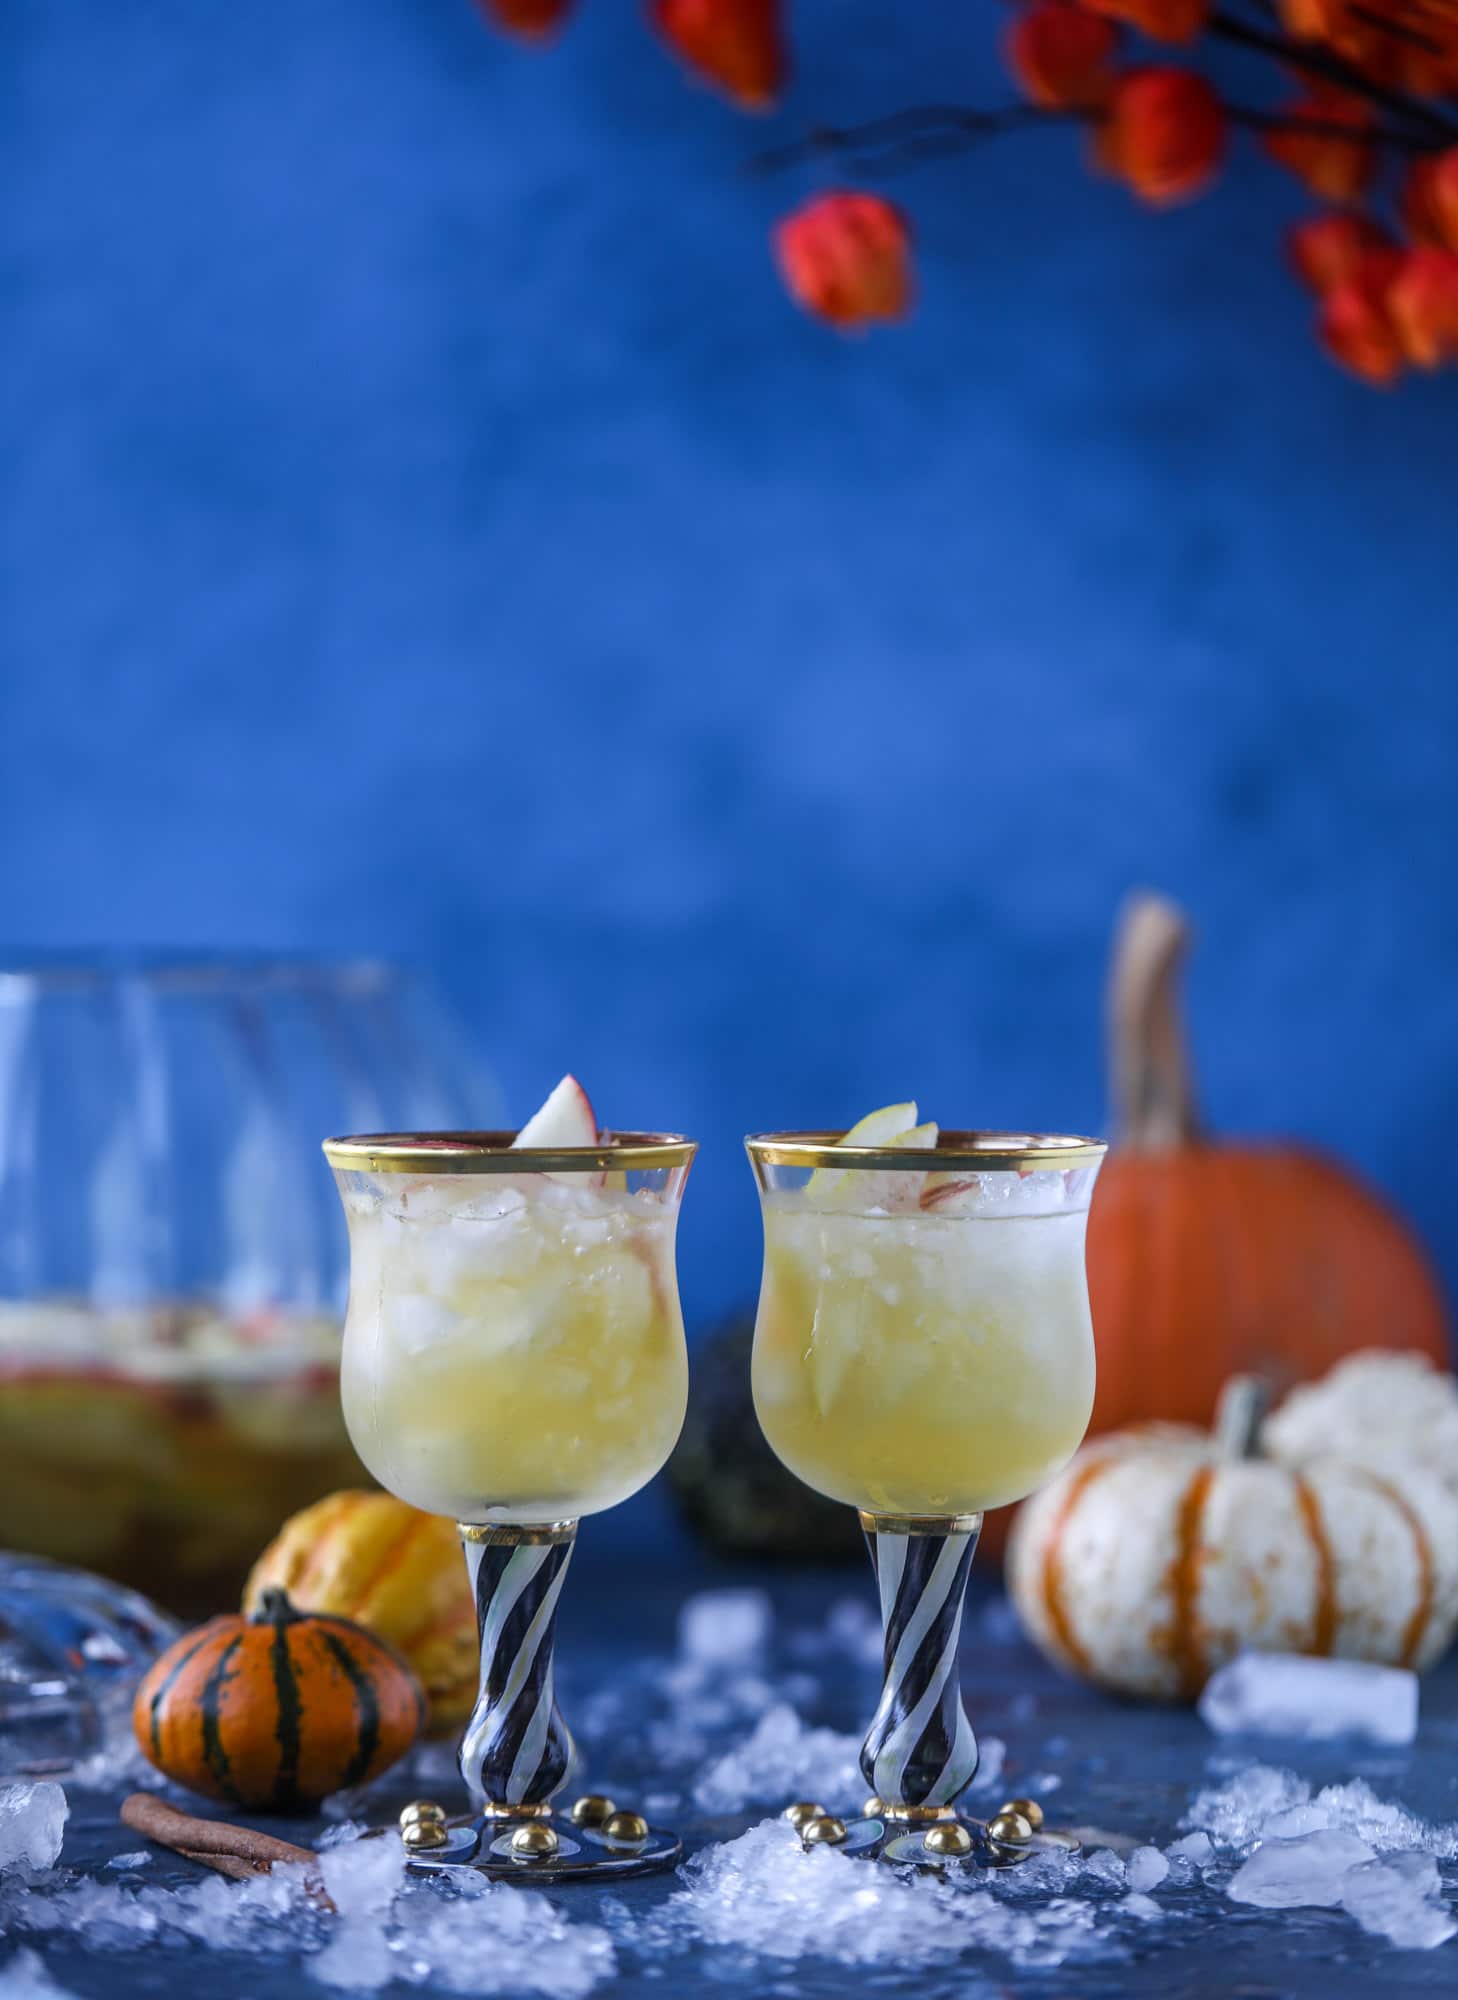 This pumpkin sangria is perfect for the fall and holiday season! A homemade pumpkin pie syrup gives the drink excellent flavor along with bubbles and apple cider and of course, boozy fruit. It's a favorite for Halloween or Thanksgiving! I howsweeteats.com #pumpkin #sangria